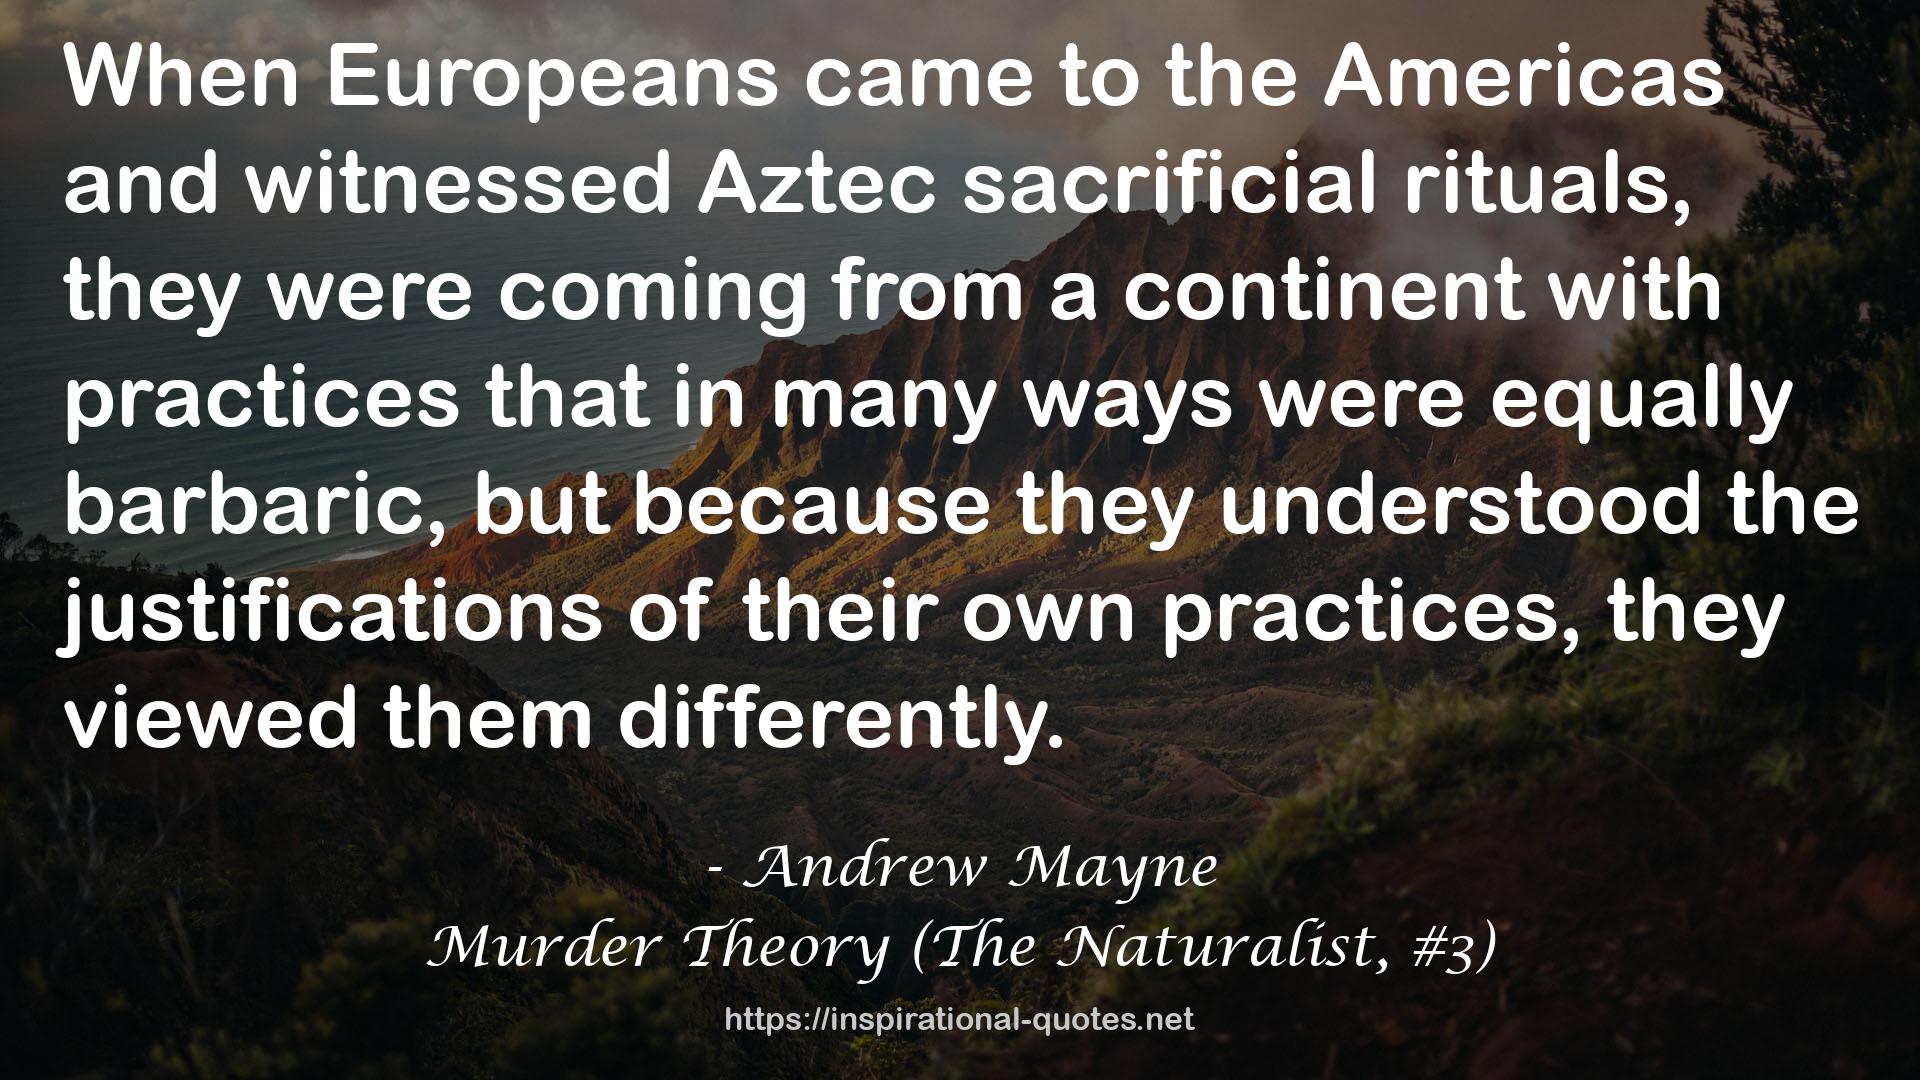 Murder Theory (The Naturalist, #3) QUOTES